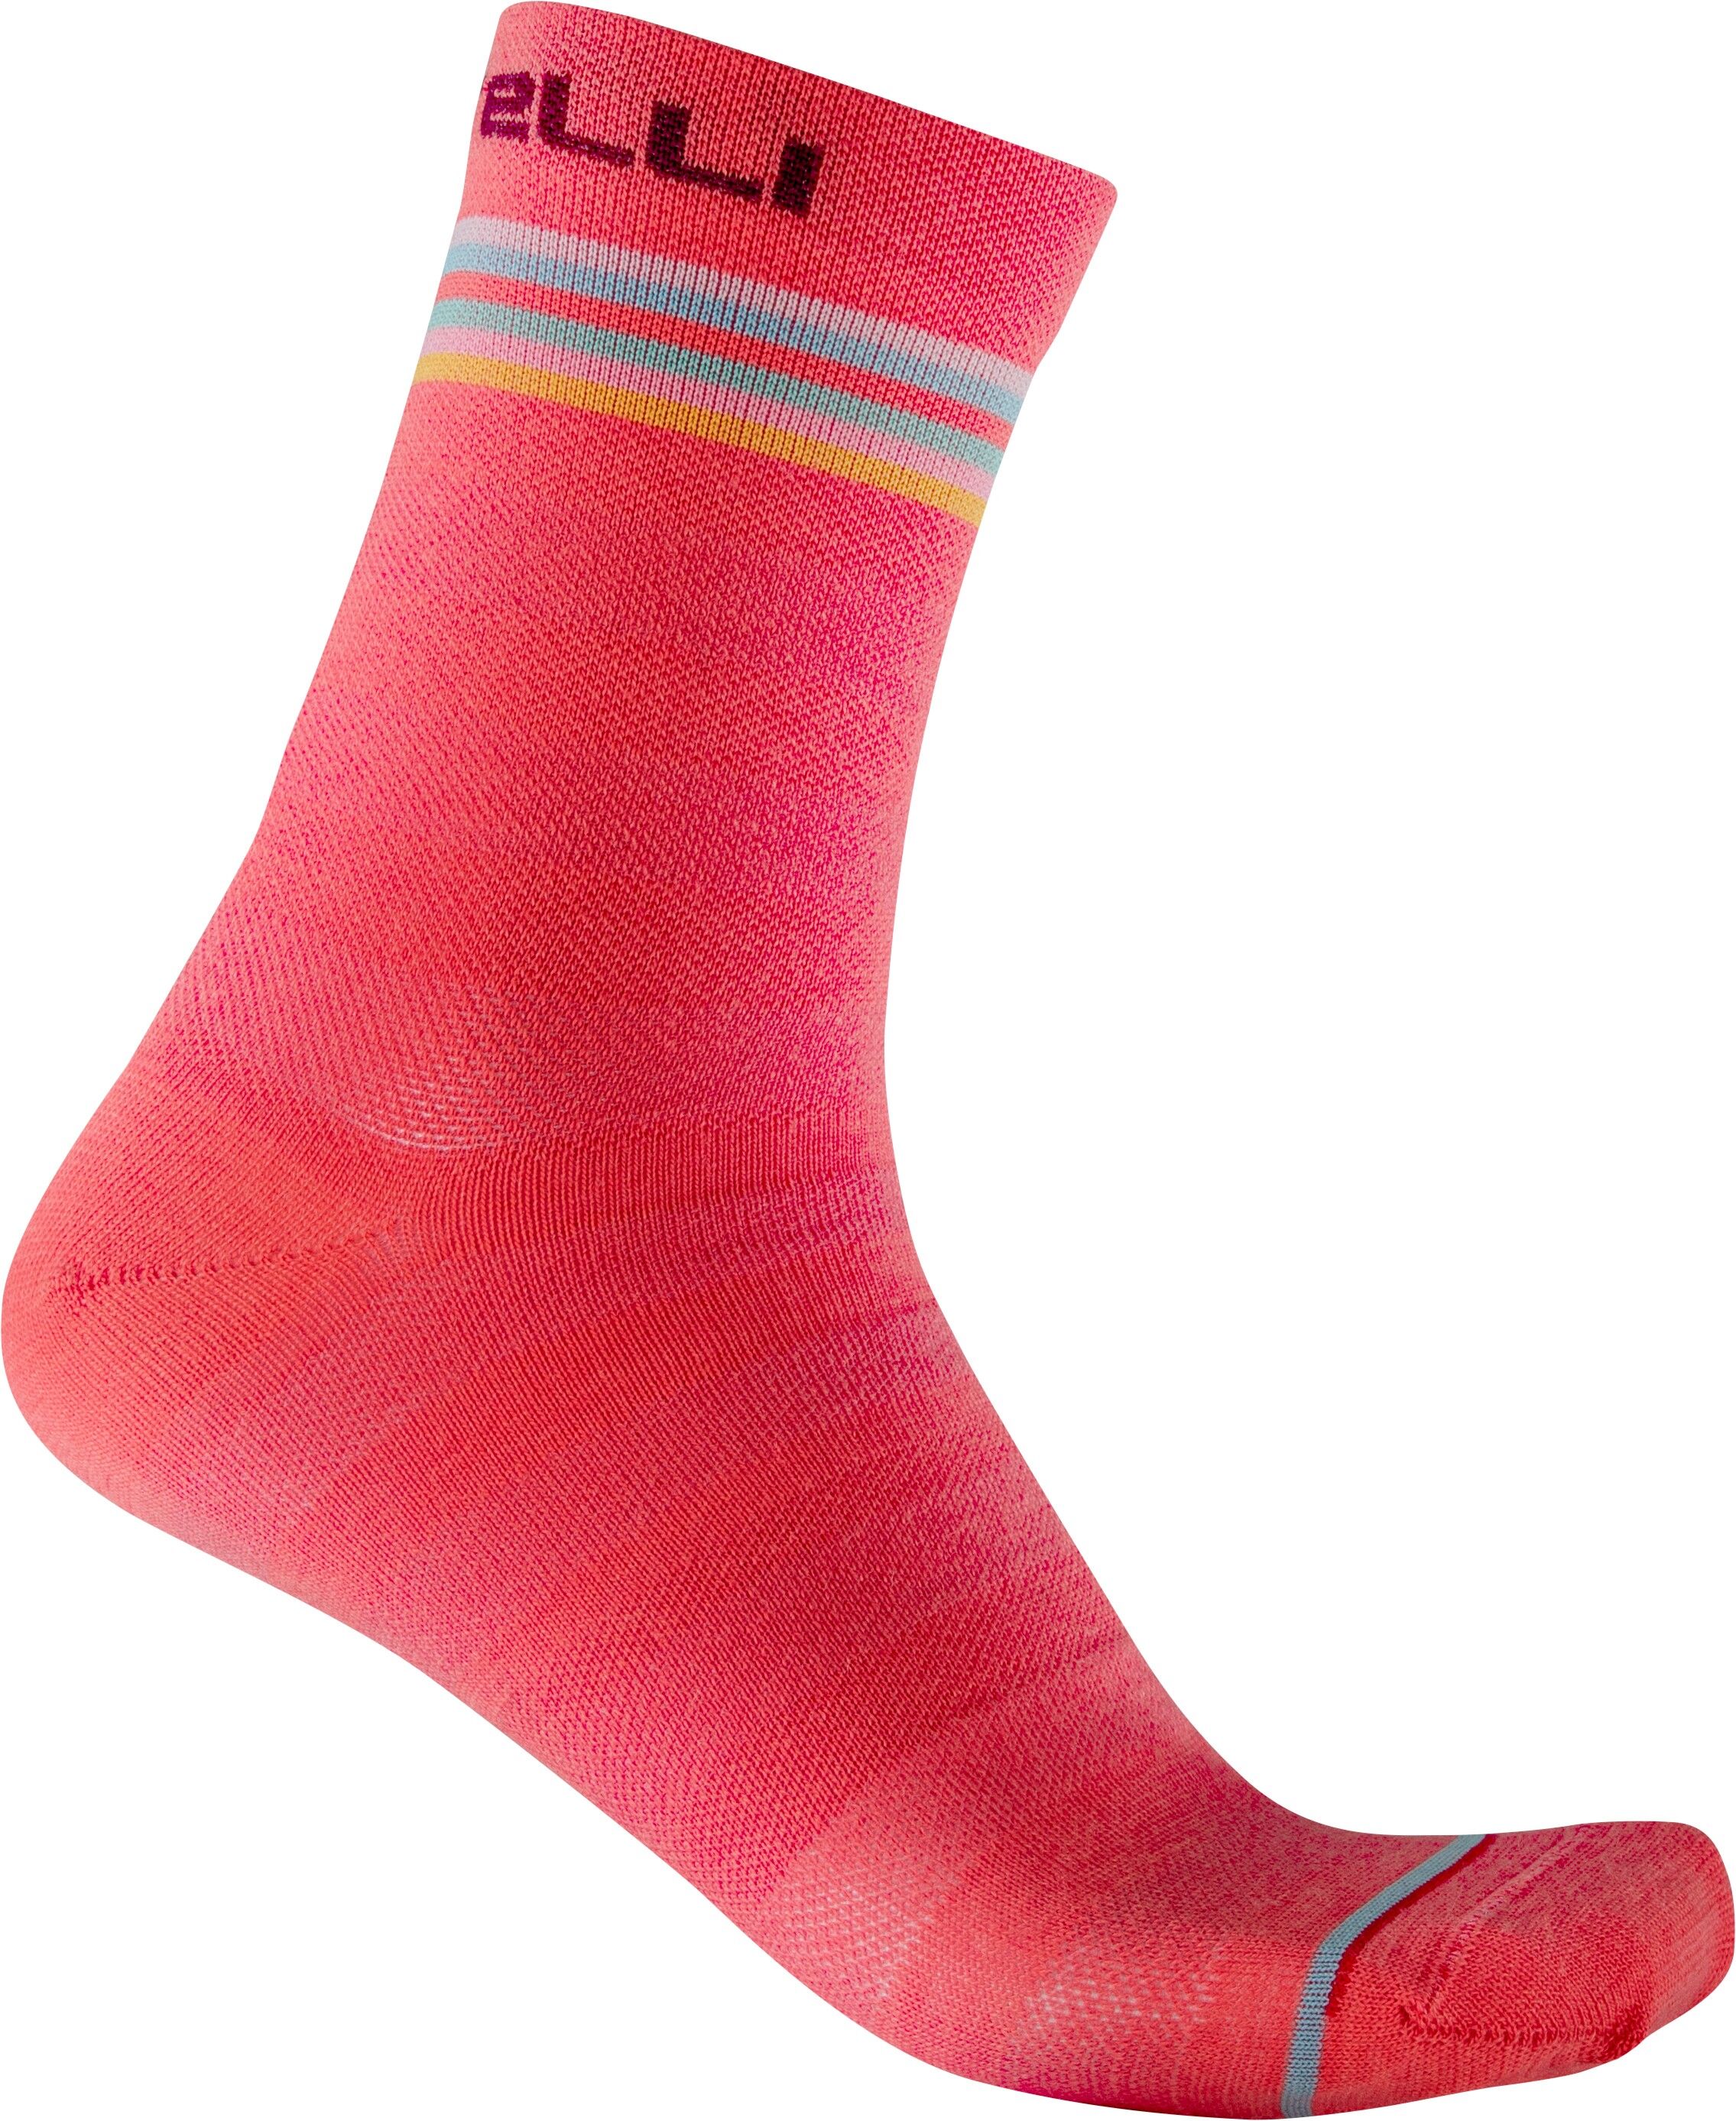 Castelli Go 15 Sock - Calcetines ciclismo - Mujer